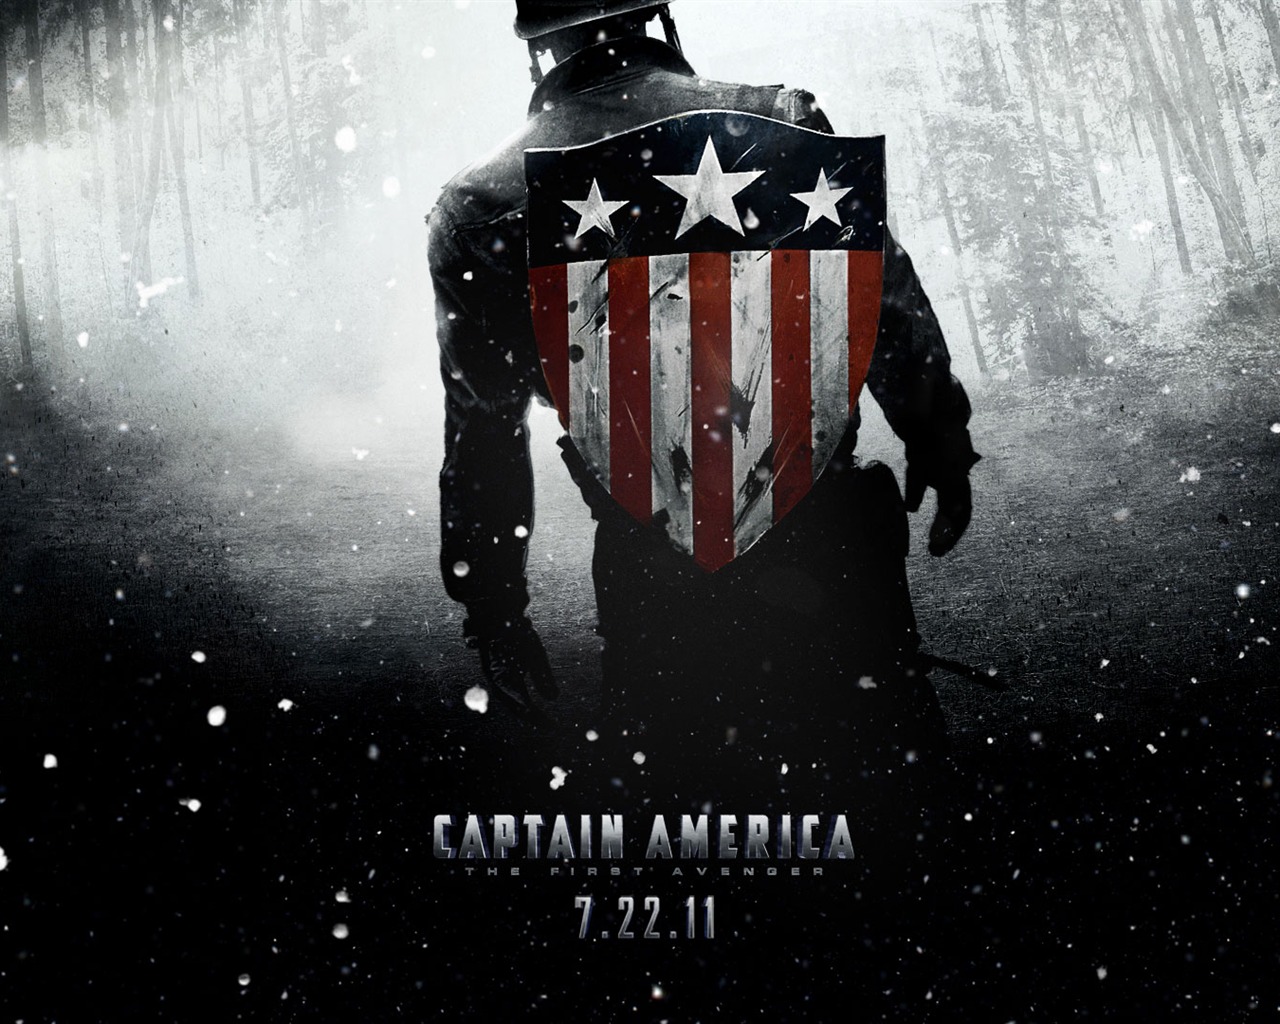 Captain America: The First Avenger wallpapers HD #3 - 1280x1024